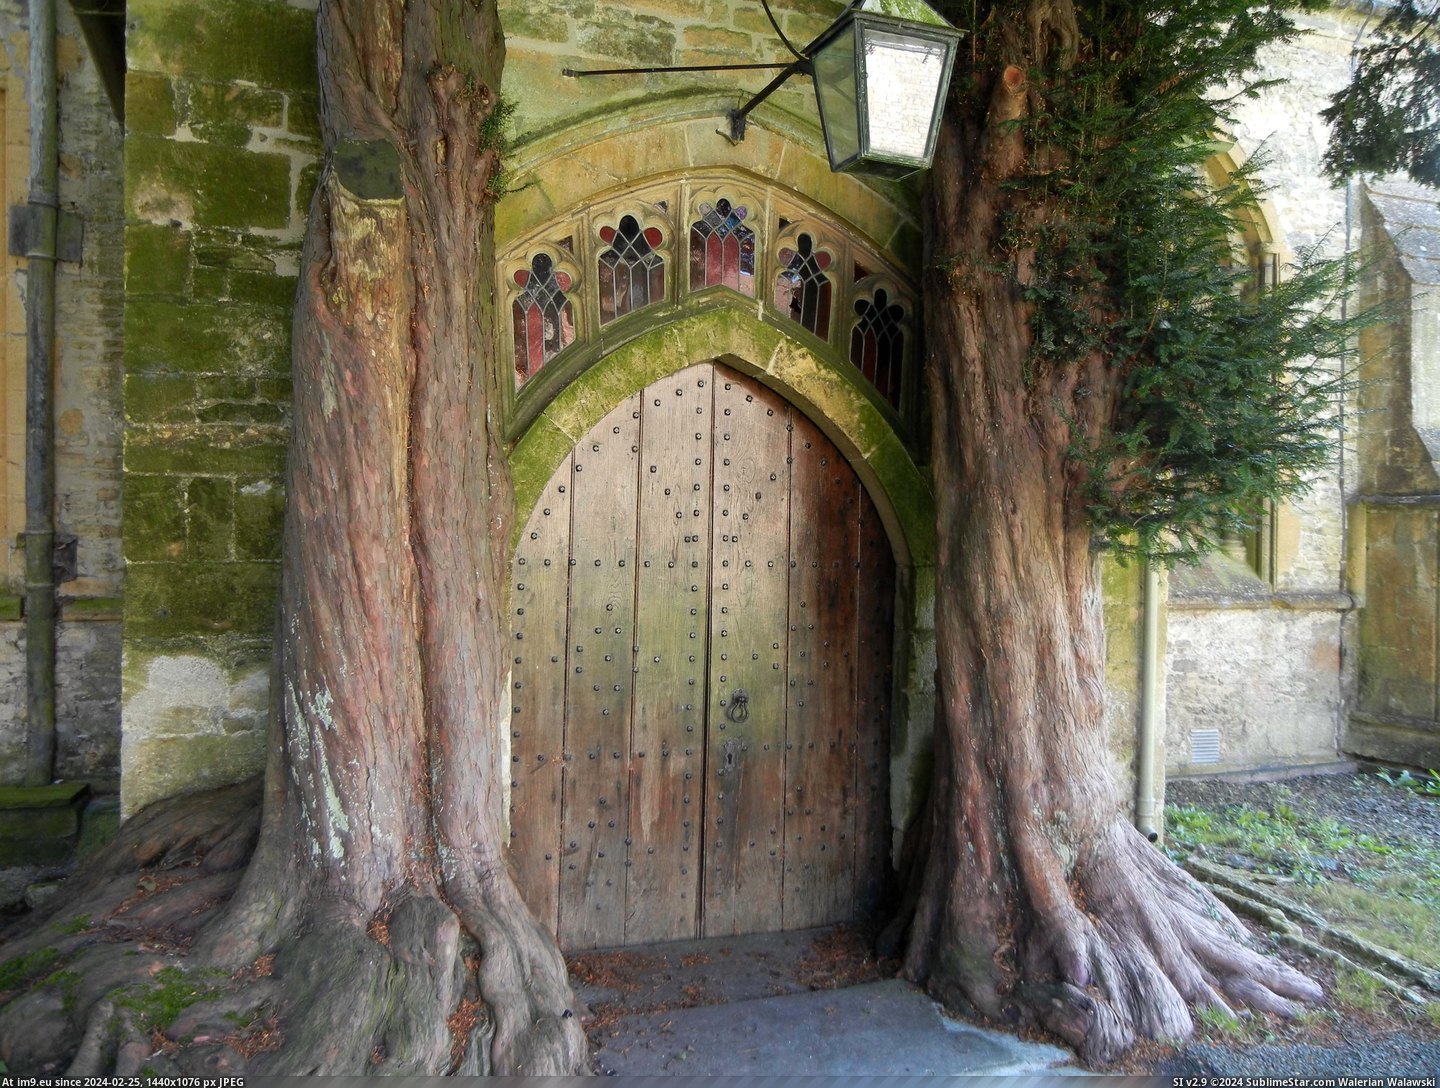 #Door #Church #Entrance #Tolkien #Gloucestershire #Medieval #Inspiration #Believed [Pics] Medieval church door in Gloucestershire believed to be the inspiration for Tolkien's entrance to Moria Pic. (Obraz z album My r/PICS favs))